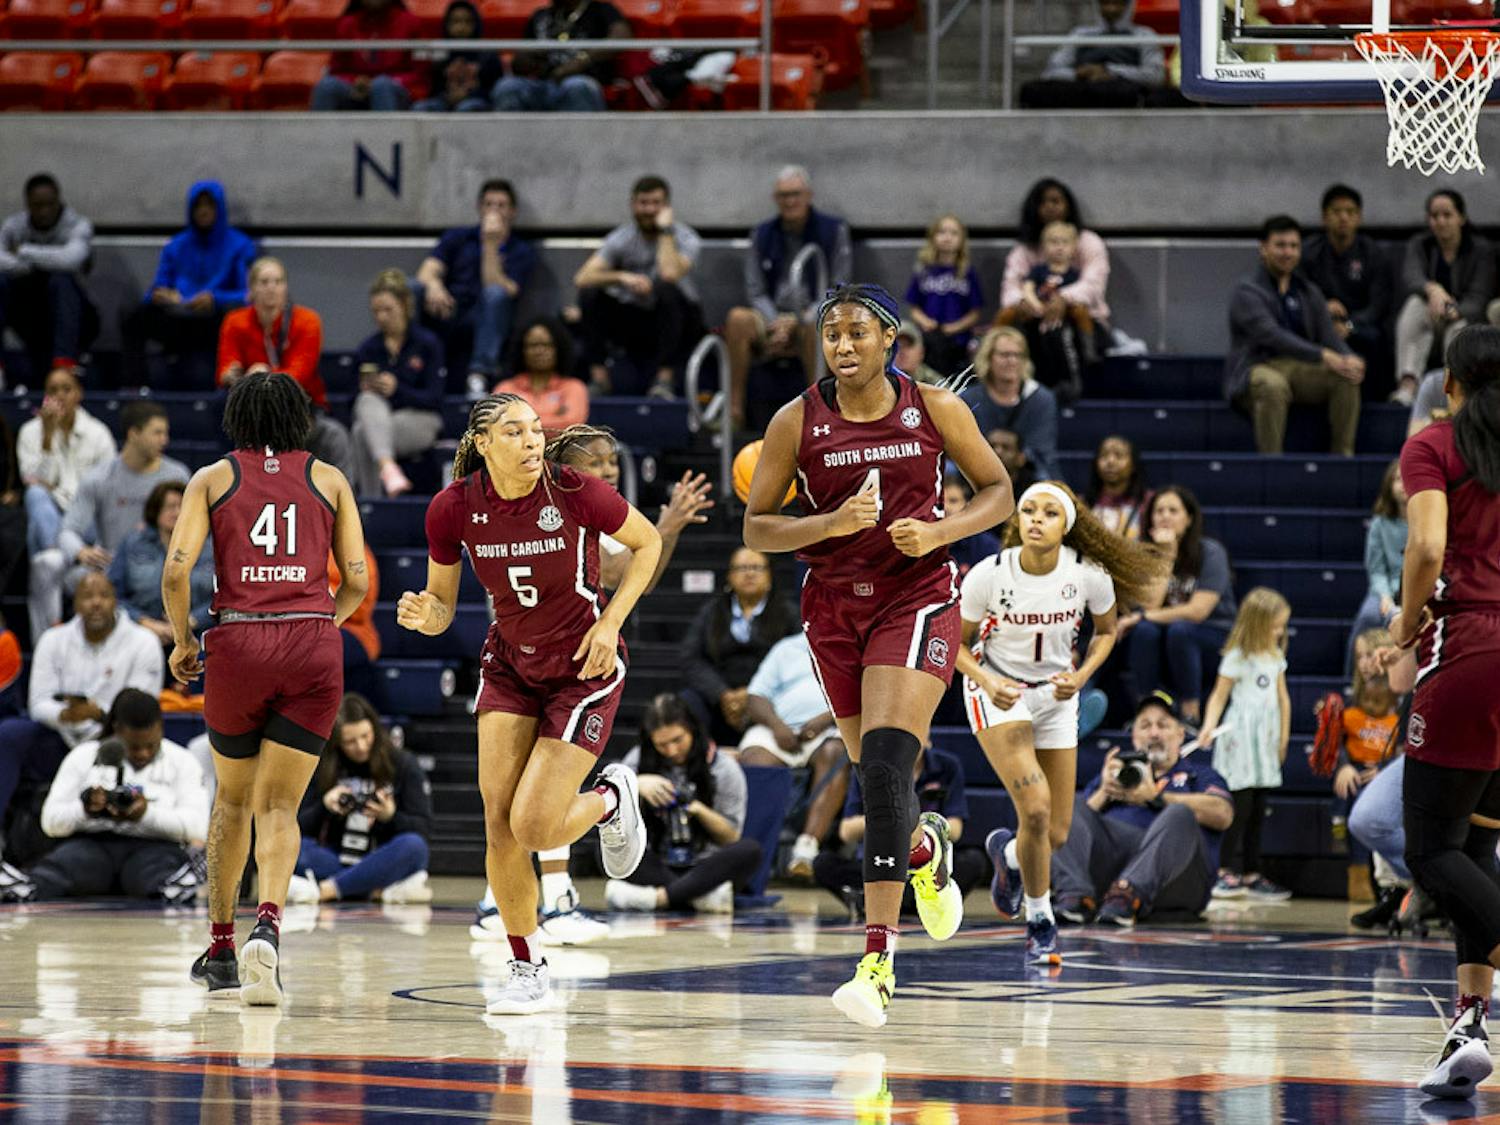 Senior forward Victaria Saxton (on left) and senior forward Aliyah Boston (on right) run down the court after the ball is turned over to Auburn during the Gamecocks' and Tigers' matchup on Feb. 9, 2023. The Gamecocks beat the Tigers 83-48.